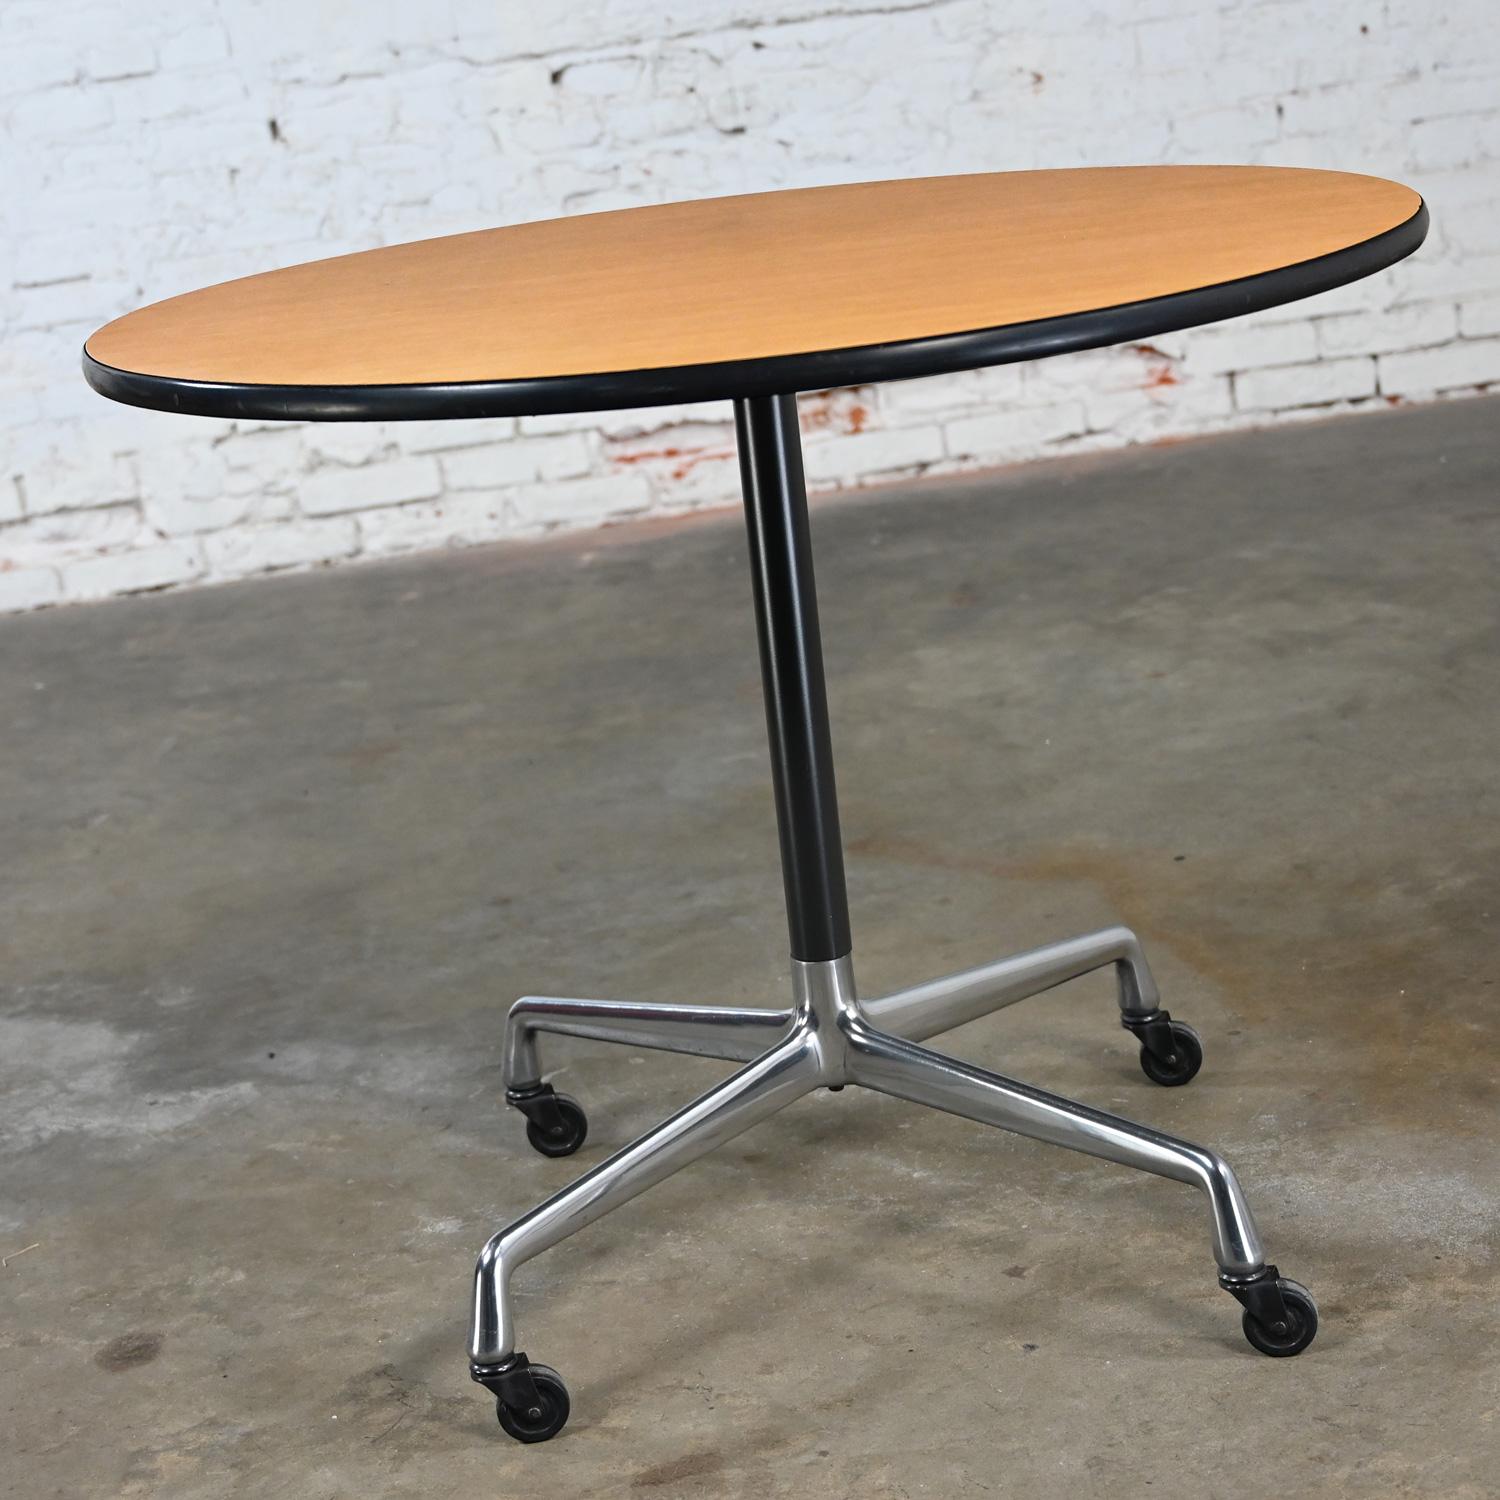 Eames Herman Miller Round Table Universal Base Casters & 36” Blonde Laminate Top For Sale 4